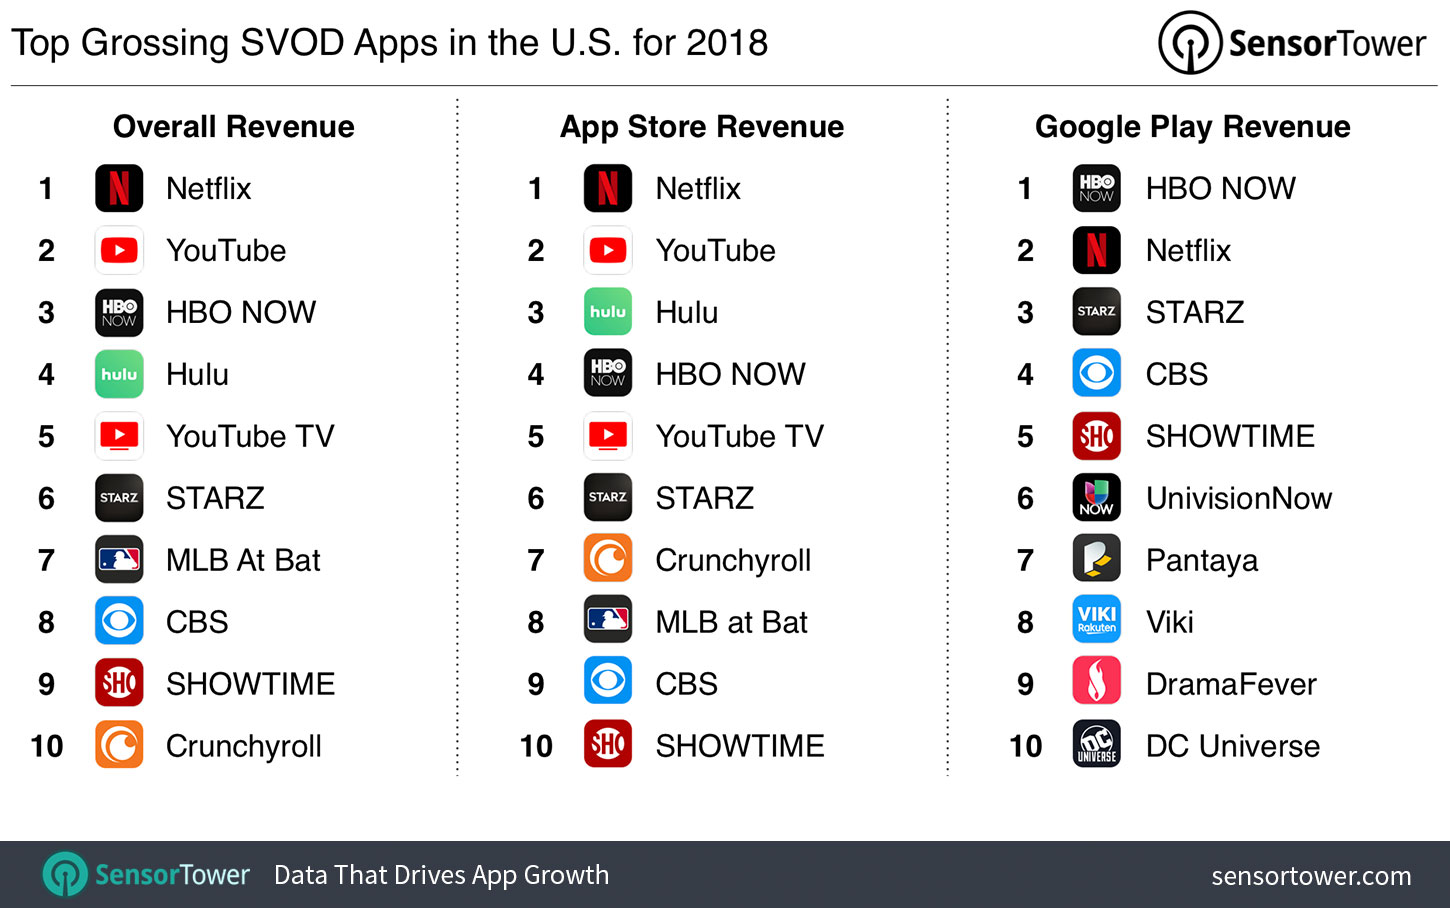 Top SVOD Apps by Revenue in the U.S. for 2018